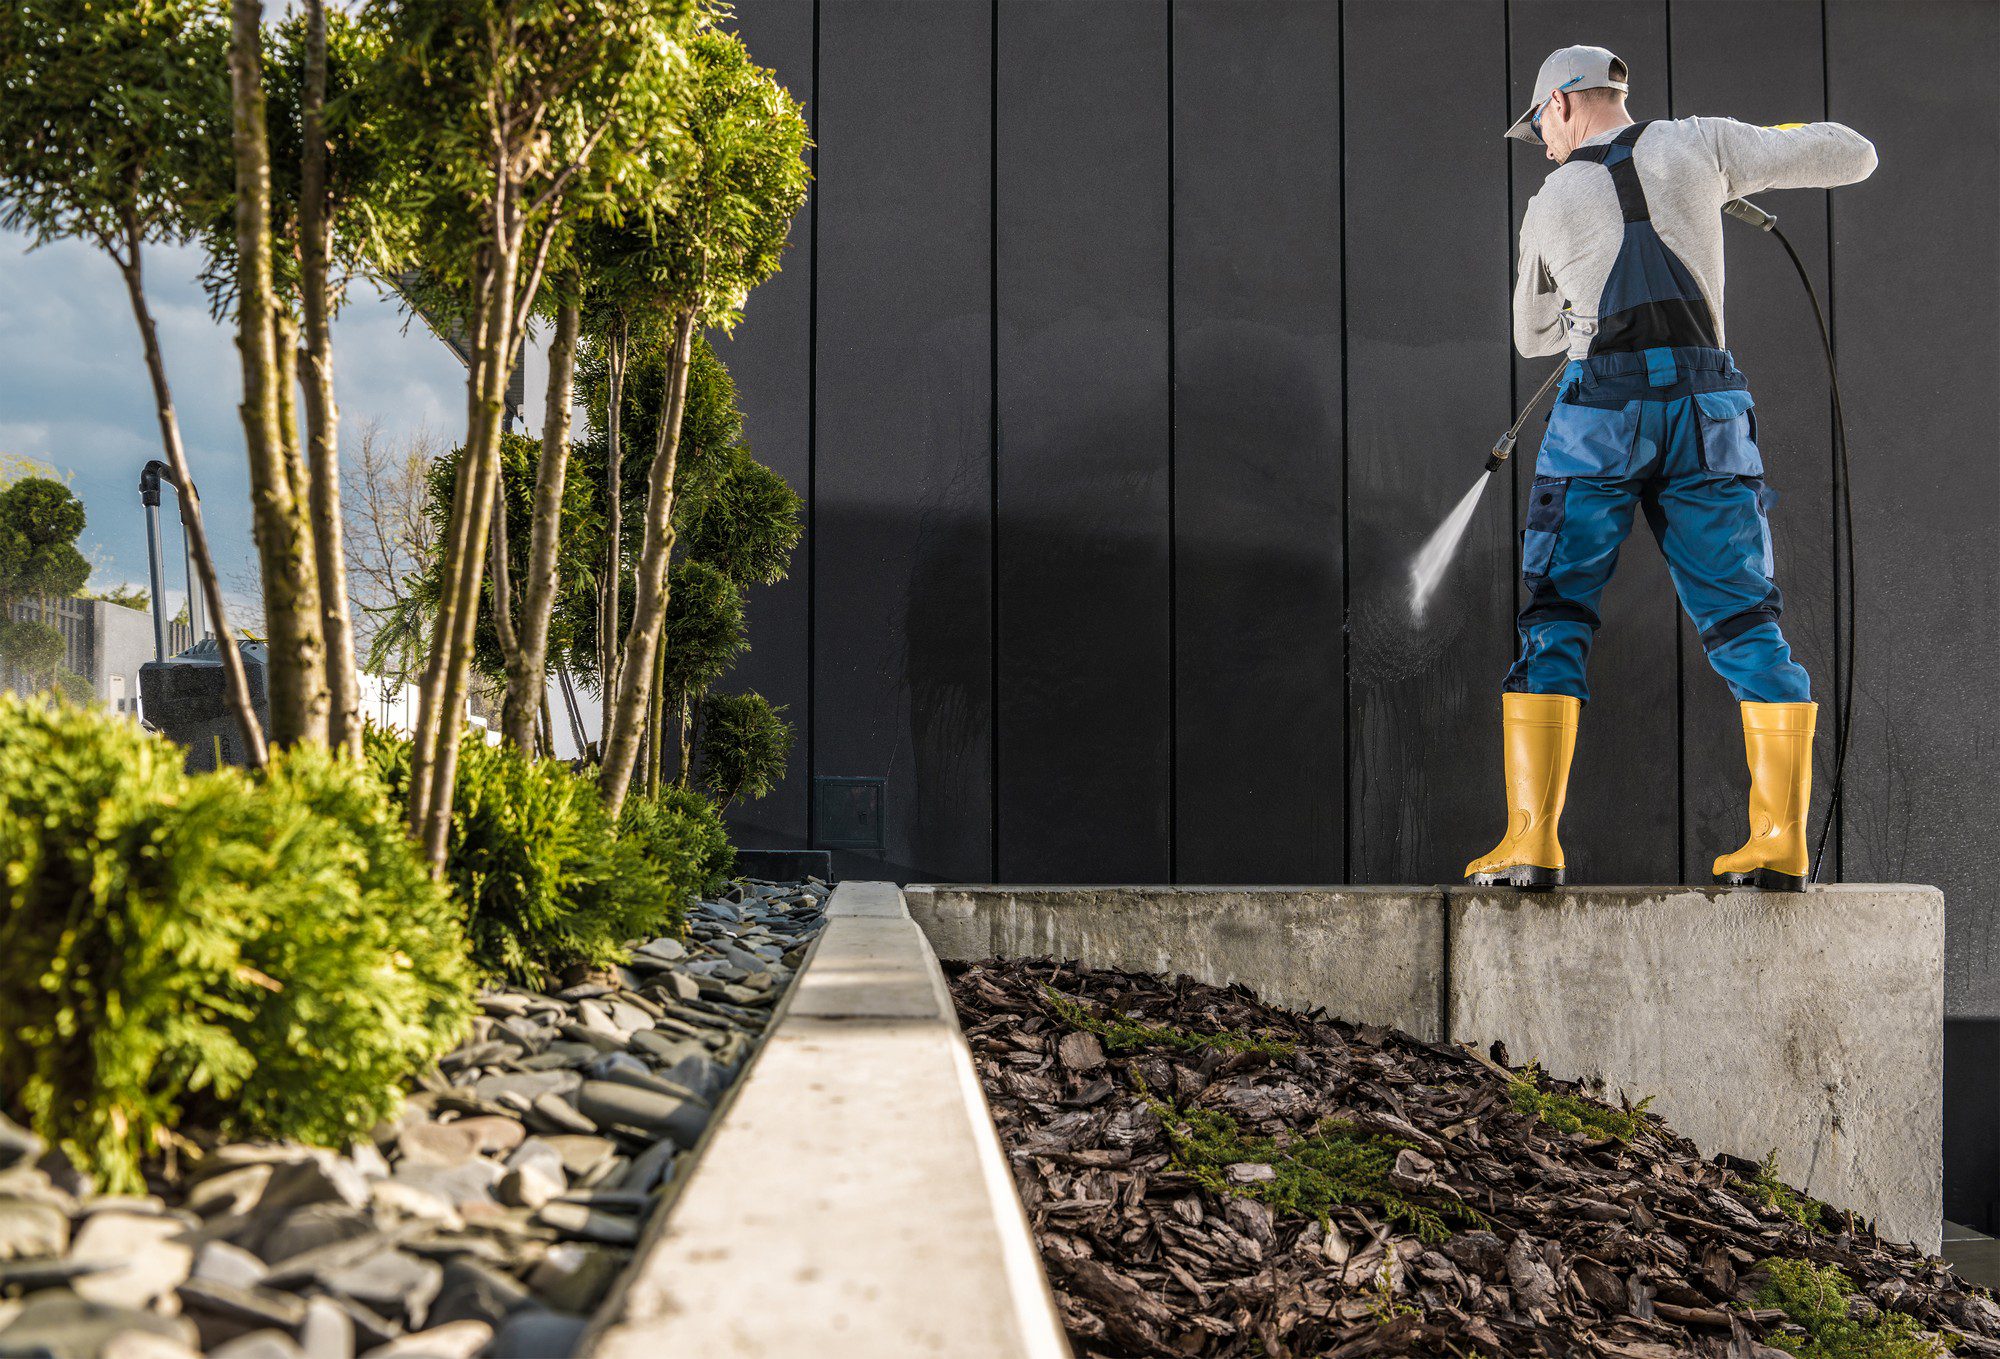 This image shows a person pressure washing an exterior wall. The person is wearing protective yellow boots, blue waterproof overalls, and a long-sleeved grey shirt. They have on a white baseball cap and are using a high-pressure washer that is emitting a powerful stream of water towards the wall. They are standing on a concrete ledge, and the area surrounding them includes a landscaped section with shrubs, trees, and decorative stones. There's a contrast between the natural elements on the left side and the industrial appearance of the dark wall being cleaned.